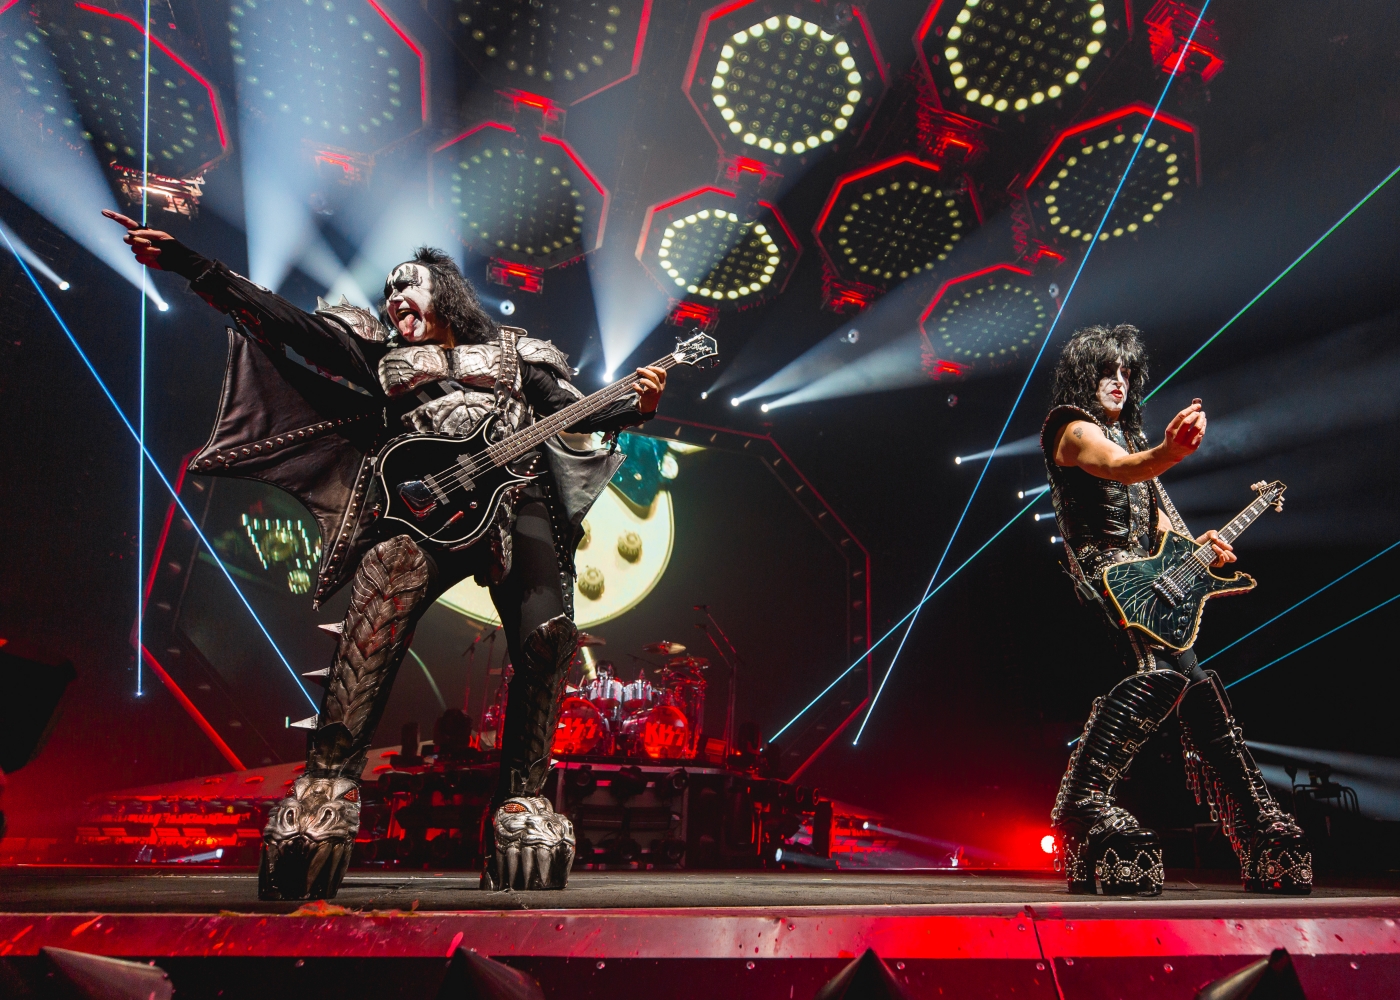 Two members of band 'KISS' on stage with makeup and theatrical rock outfits